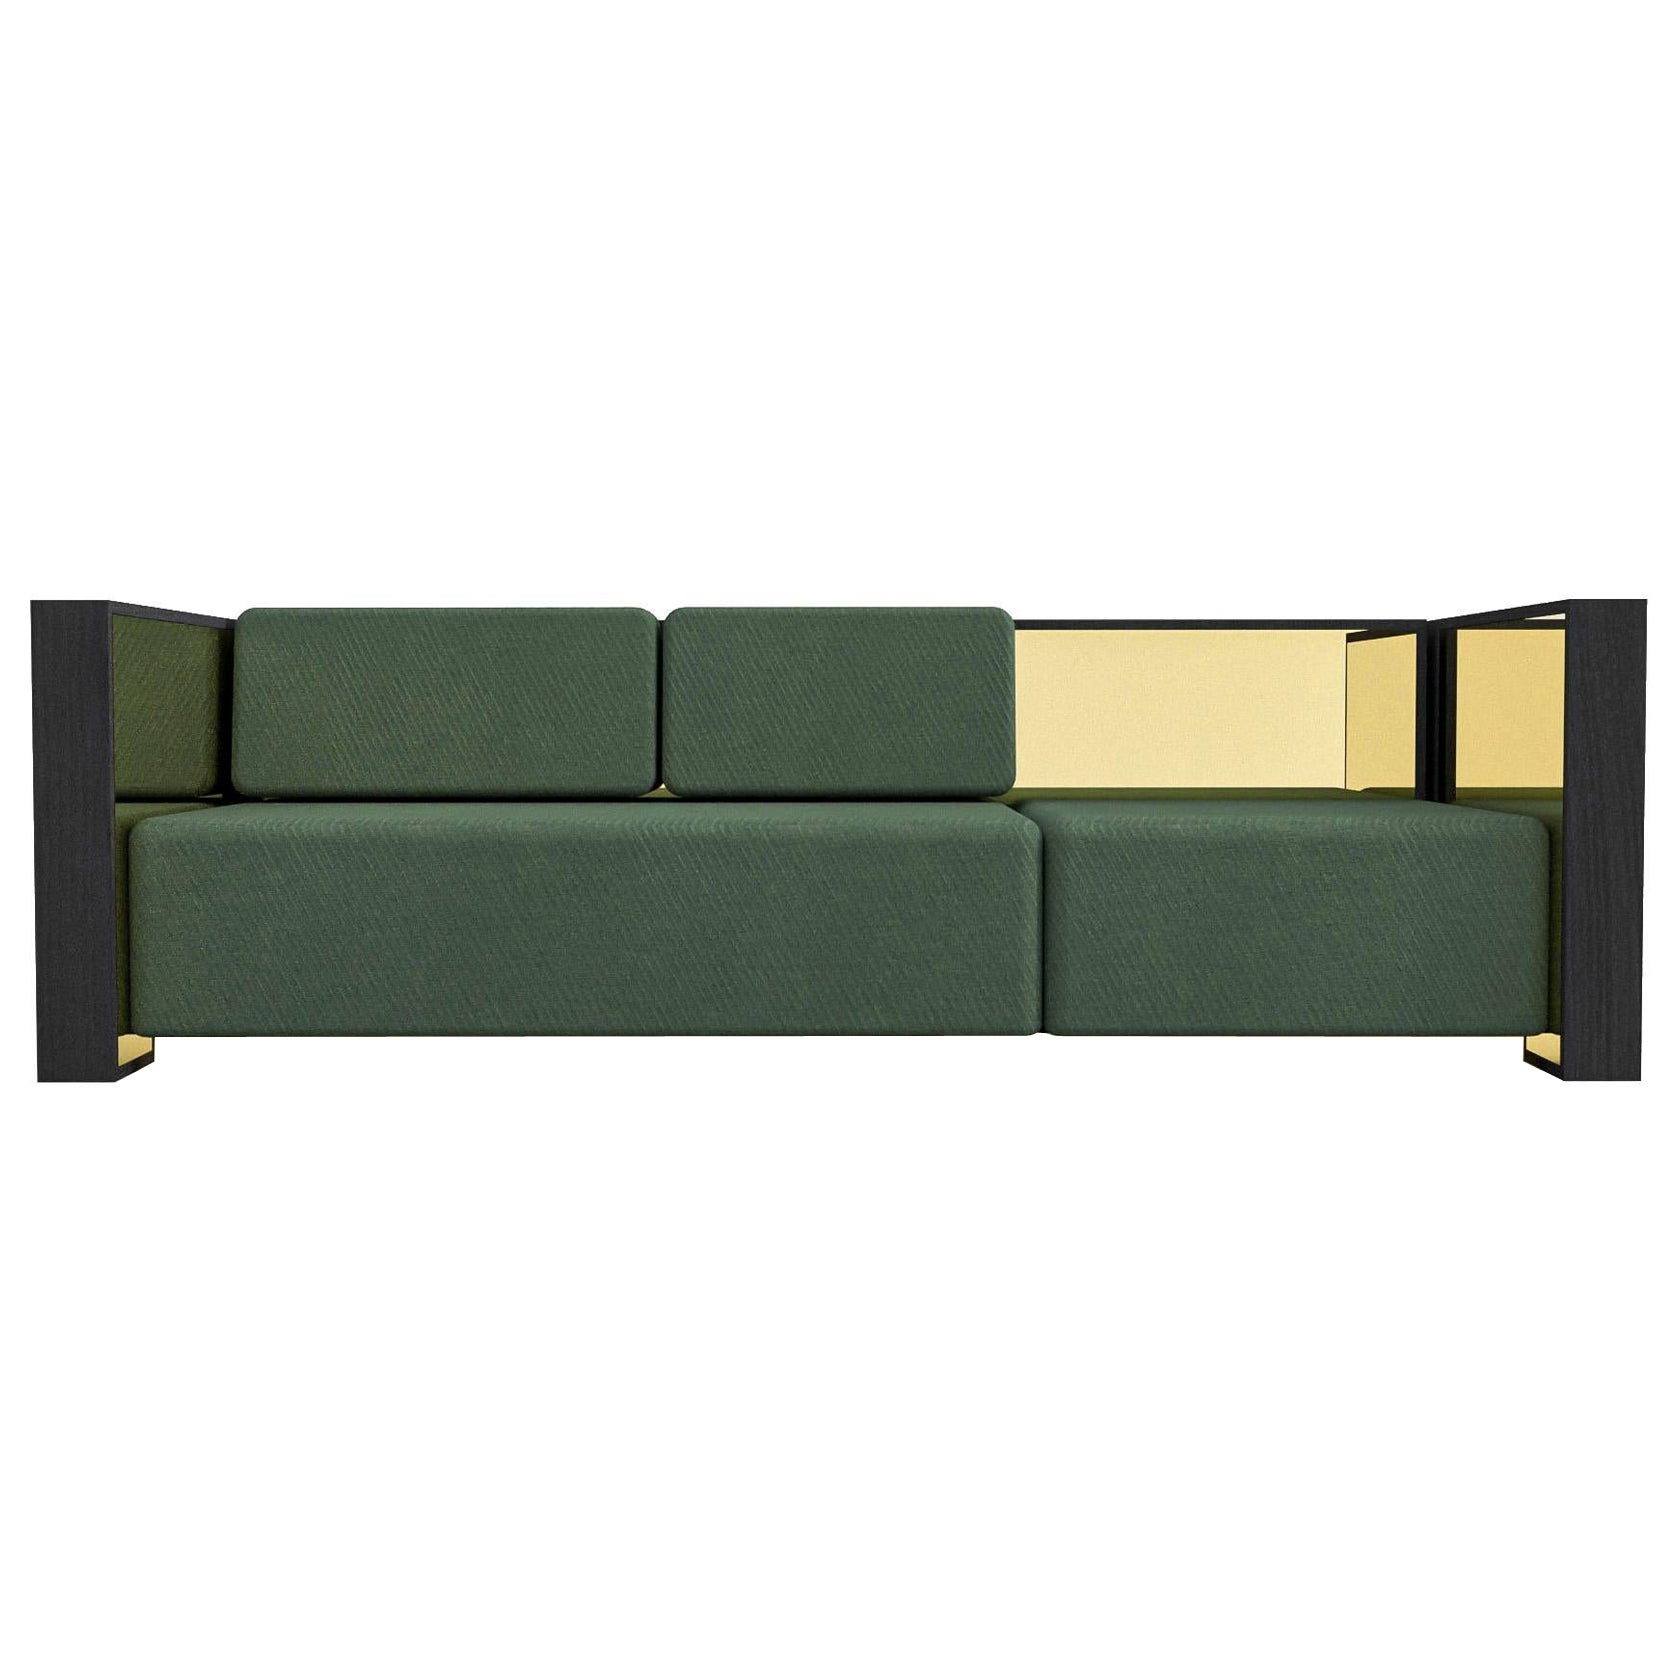 Barh Sofa in Black Stained Ash Wood, Brass and Green Upholstery, 3 Seater For Sale